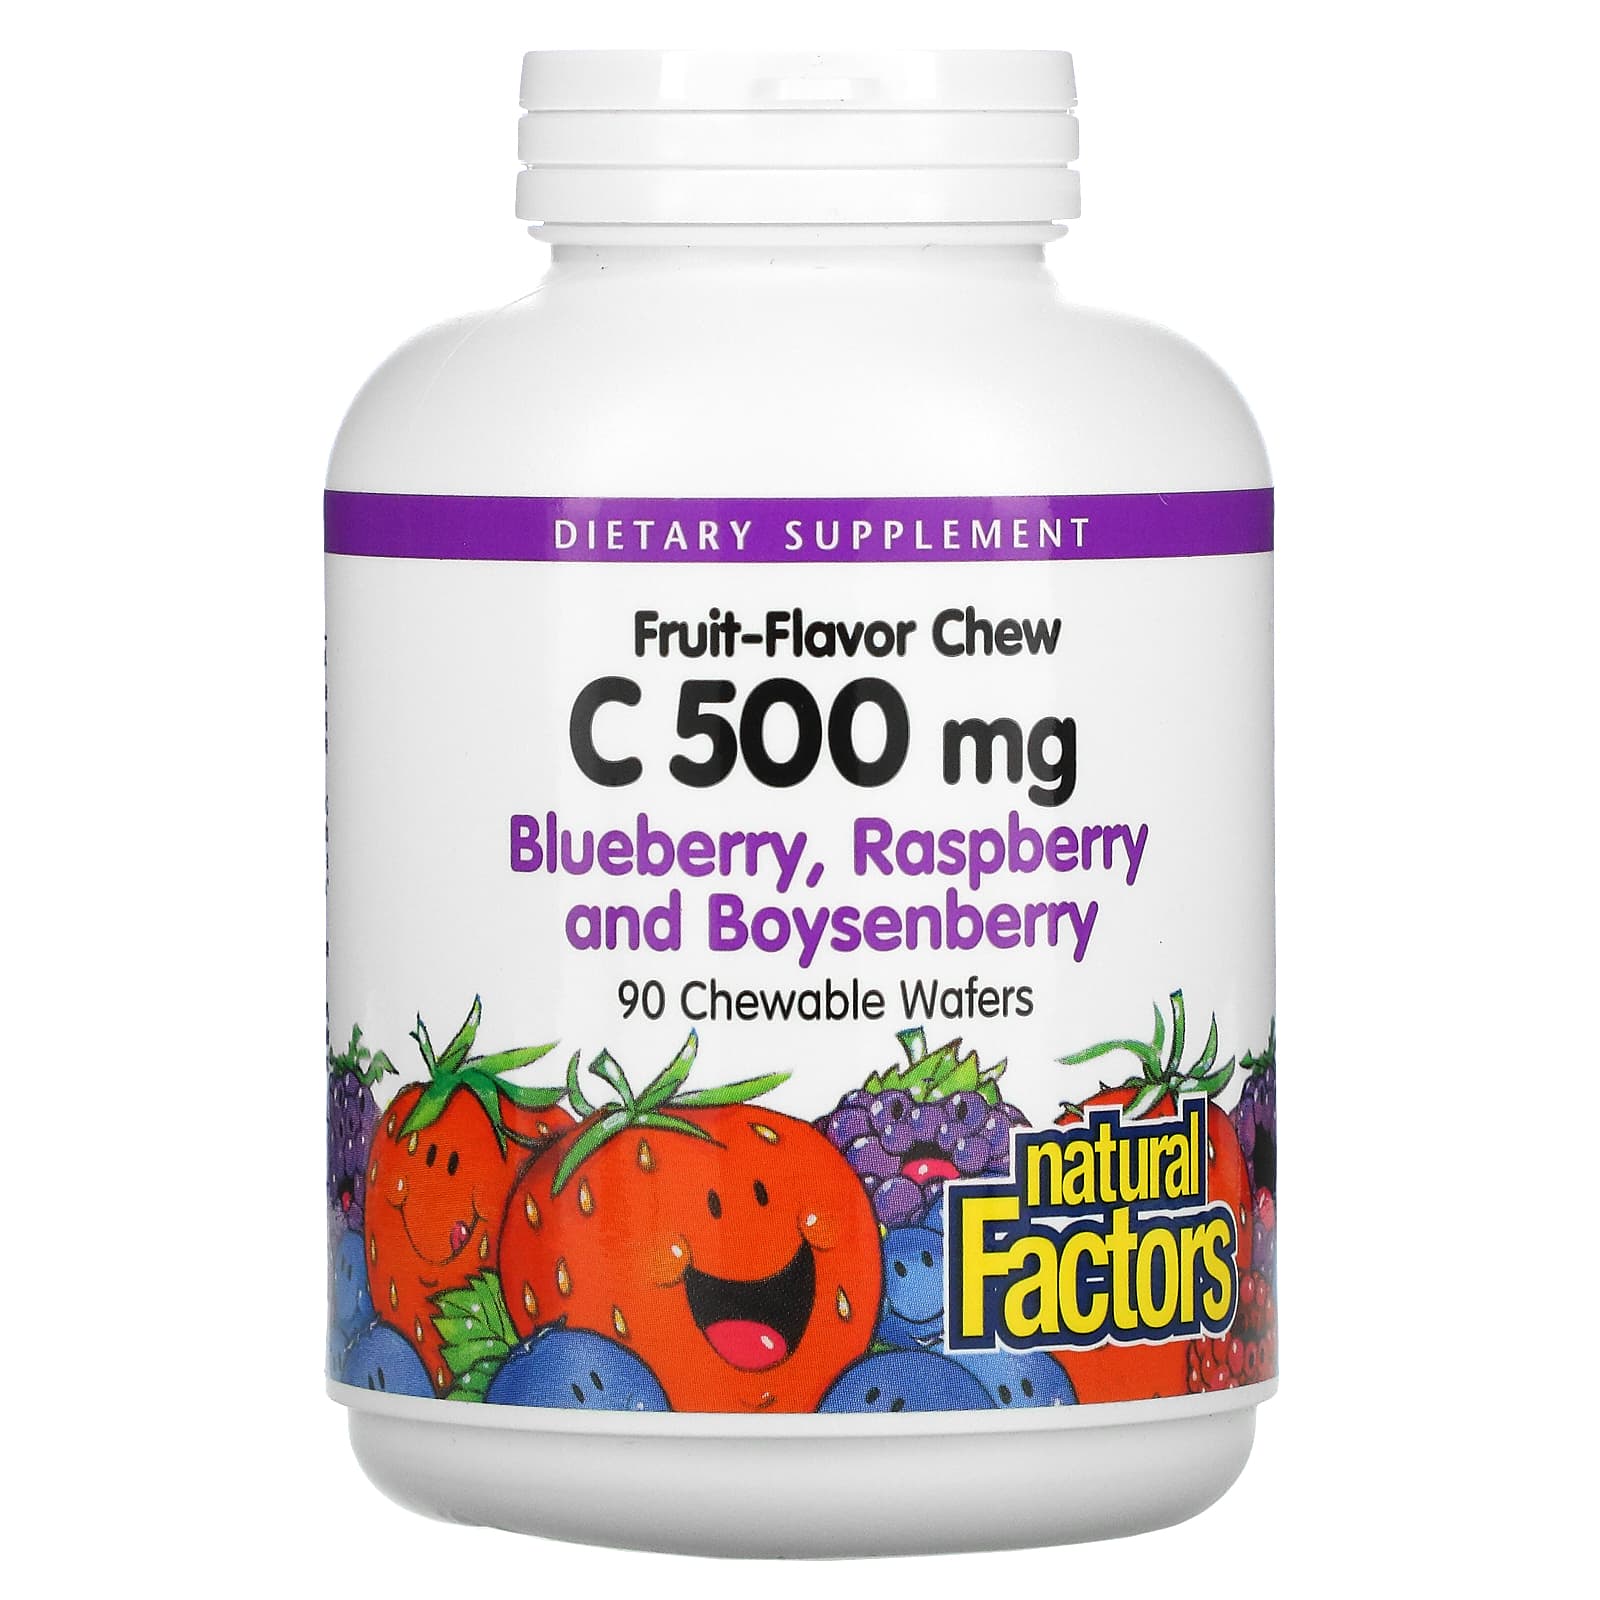 Natural Factors Fruit-Flavor Chew Vitamin C, Blueberry, Raspberry And Boysenberry, 500 Mg, 90 Chewable Wafers